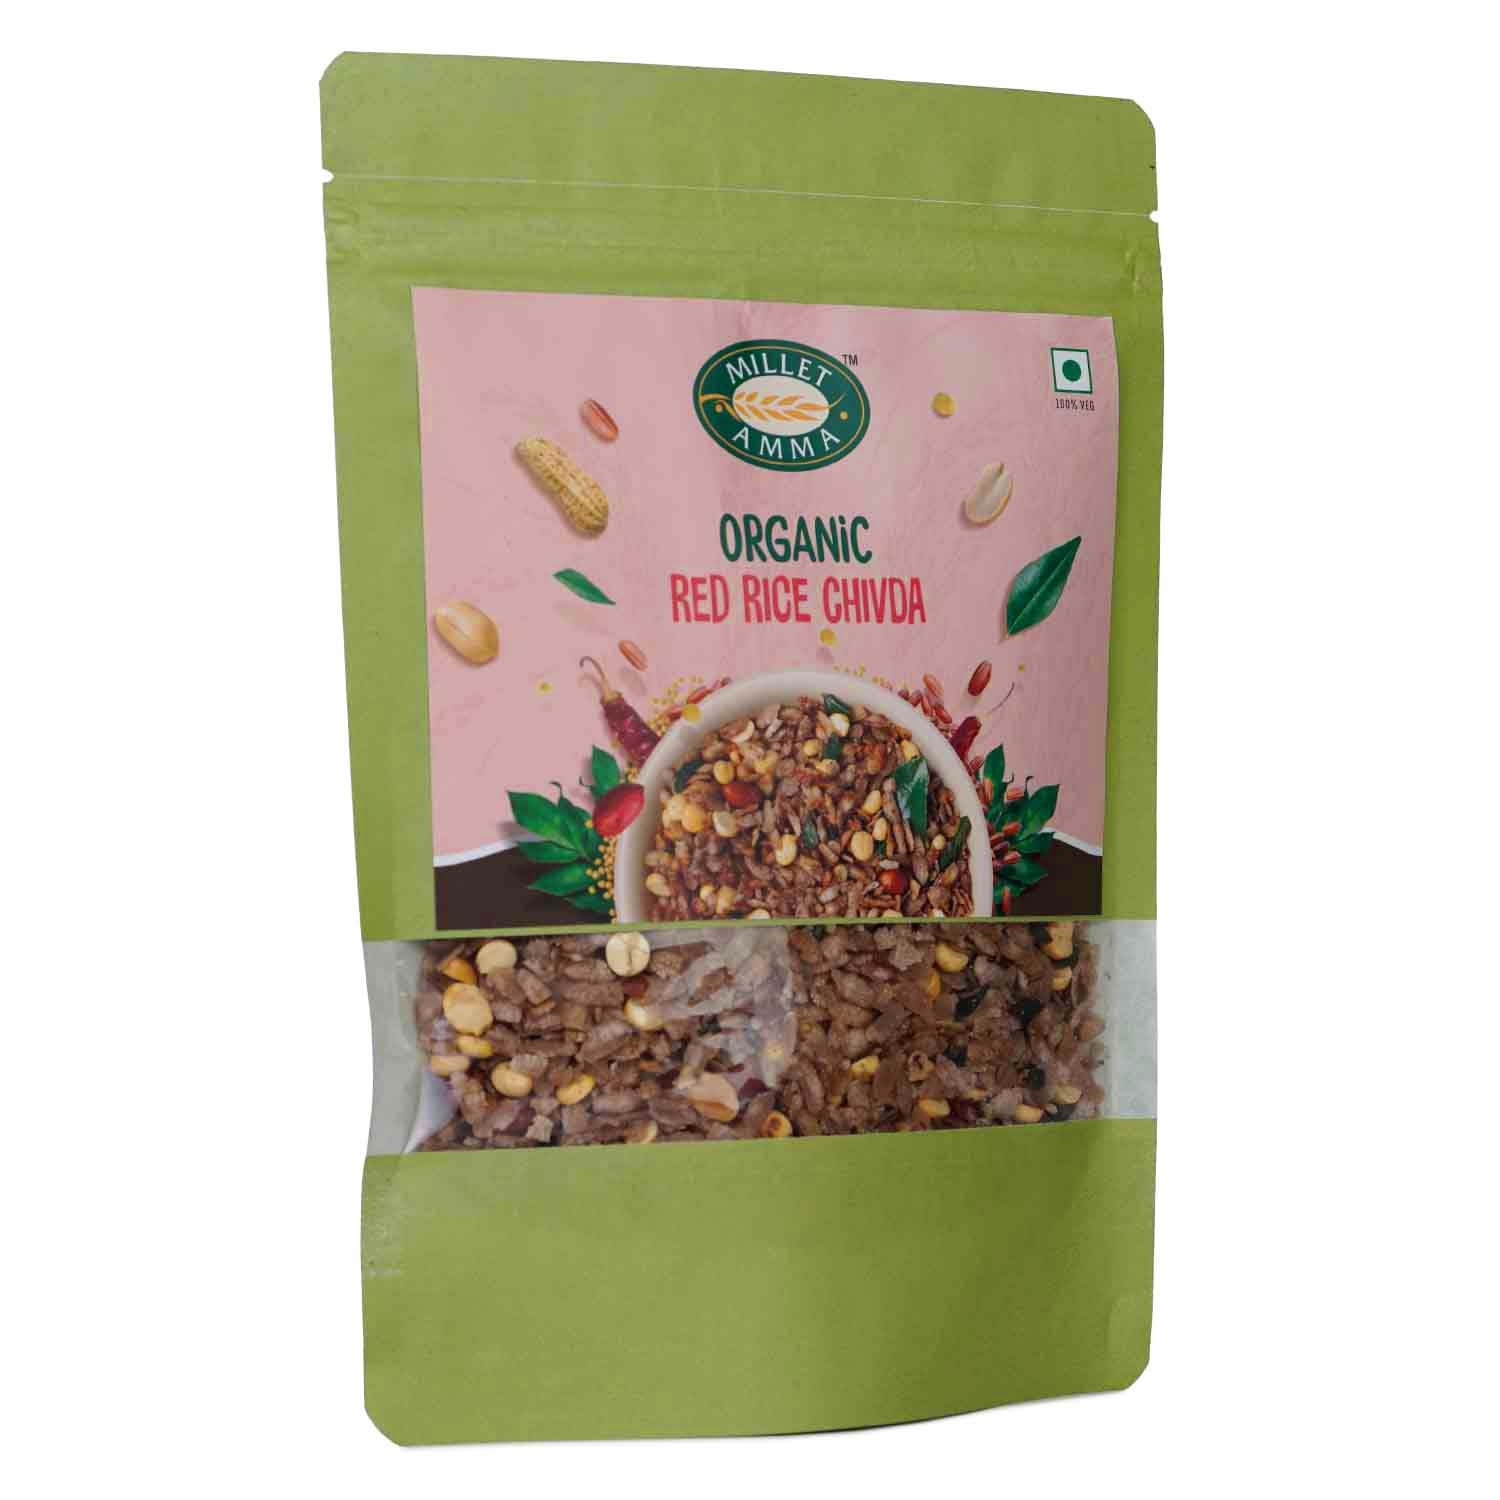 Millet Amma’s Organic Red Rice Chivda- A nutritious snack loaded with flavor, fiber, antioxidants, introducing you to Millet Amma’s Organic Red Rice Chivda.  Made from Red Rice Flakes, Peanuts and Roasted Gram, it is crunchy, full of fiber and flavor.